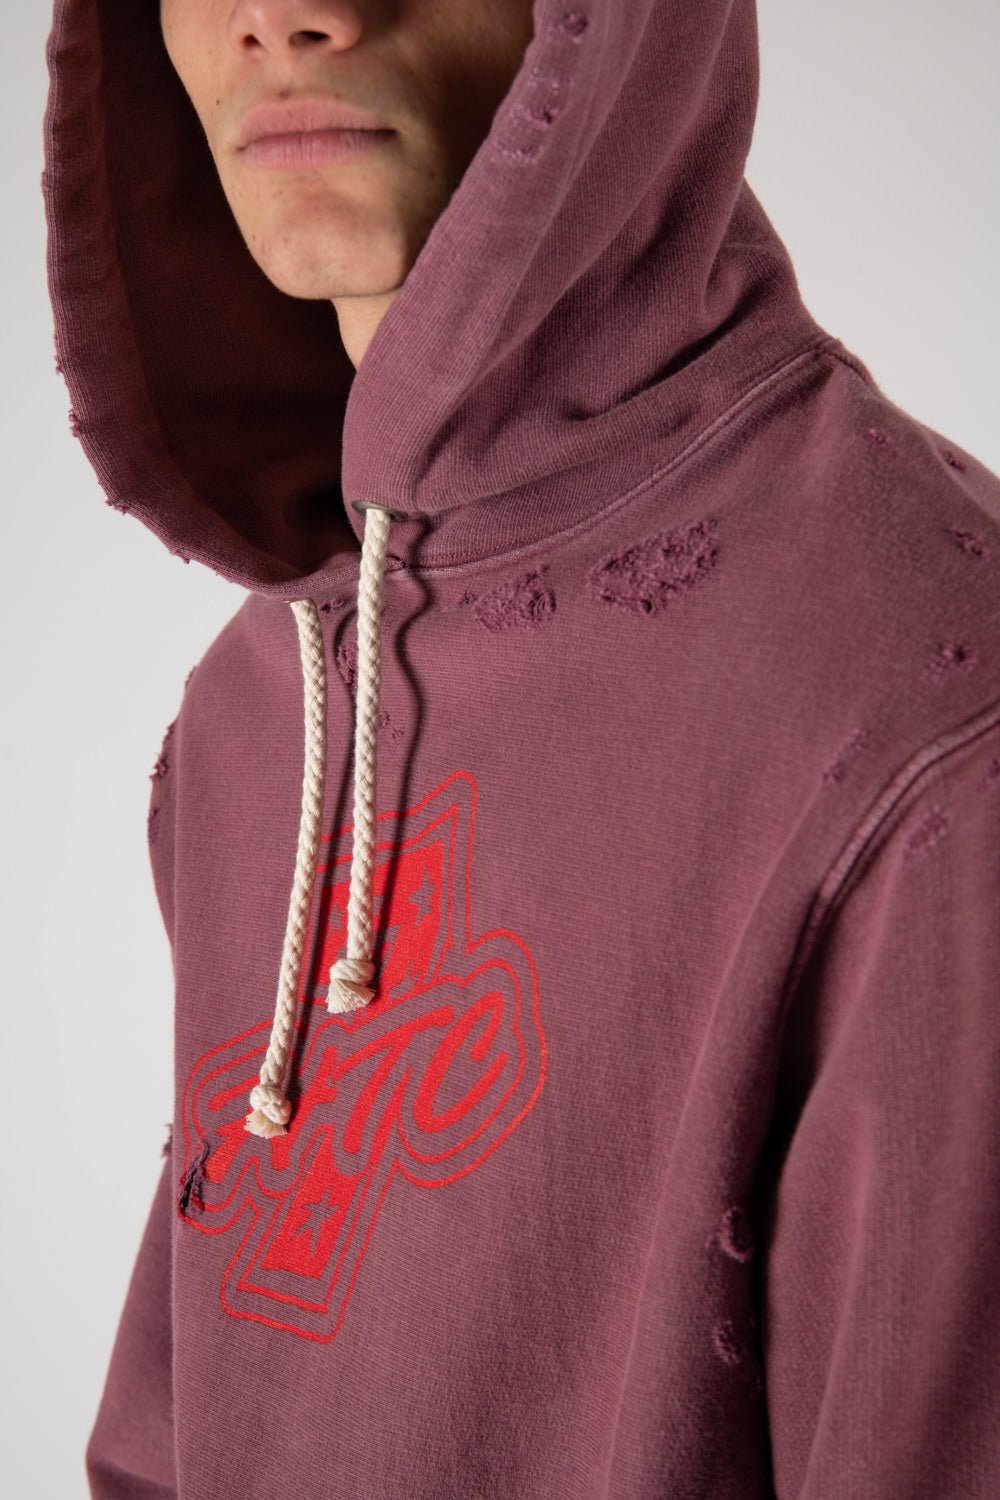 MY HOOD - AKA7 HTC 7 print distressed hoodie. Hood with drawstring, ribbed cuffs and hem. One front kangaroo pocket. Intentionally distressed areas may vary. Composition: 100% Cotton HTC LOS ANGELES